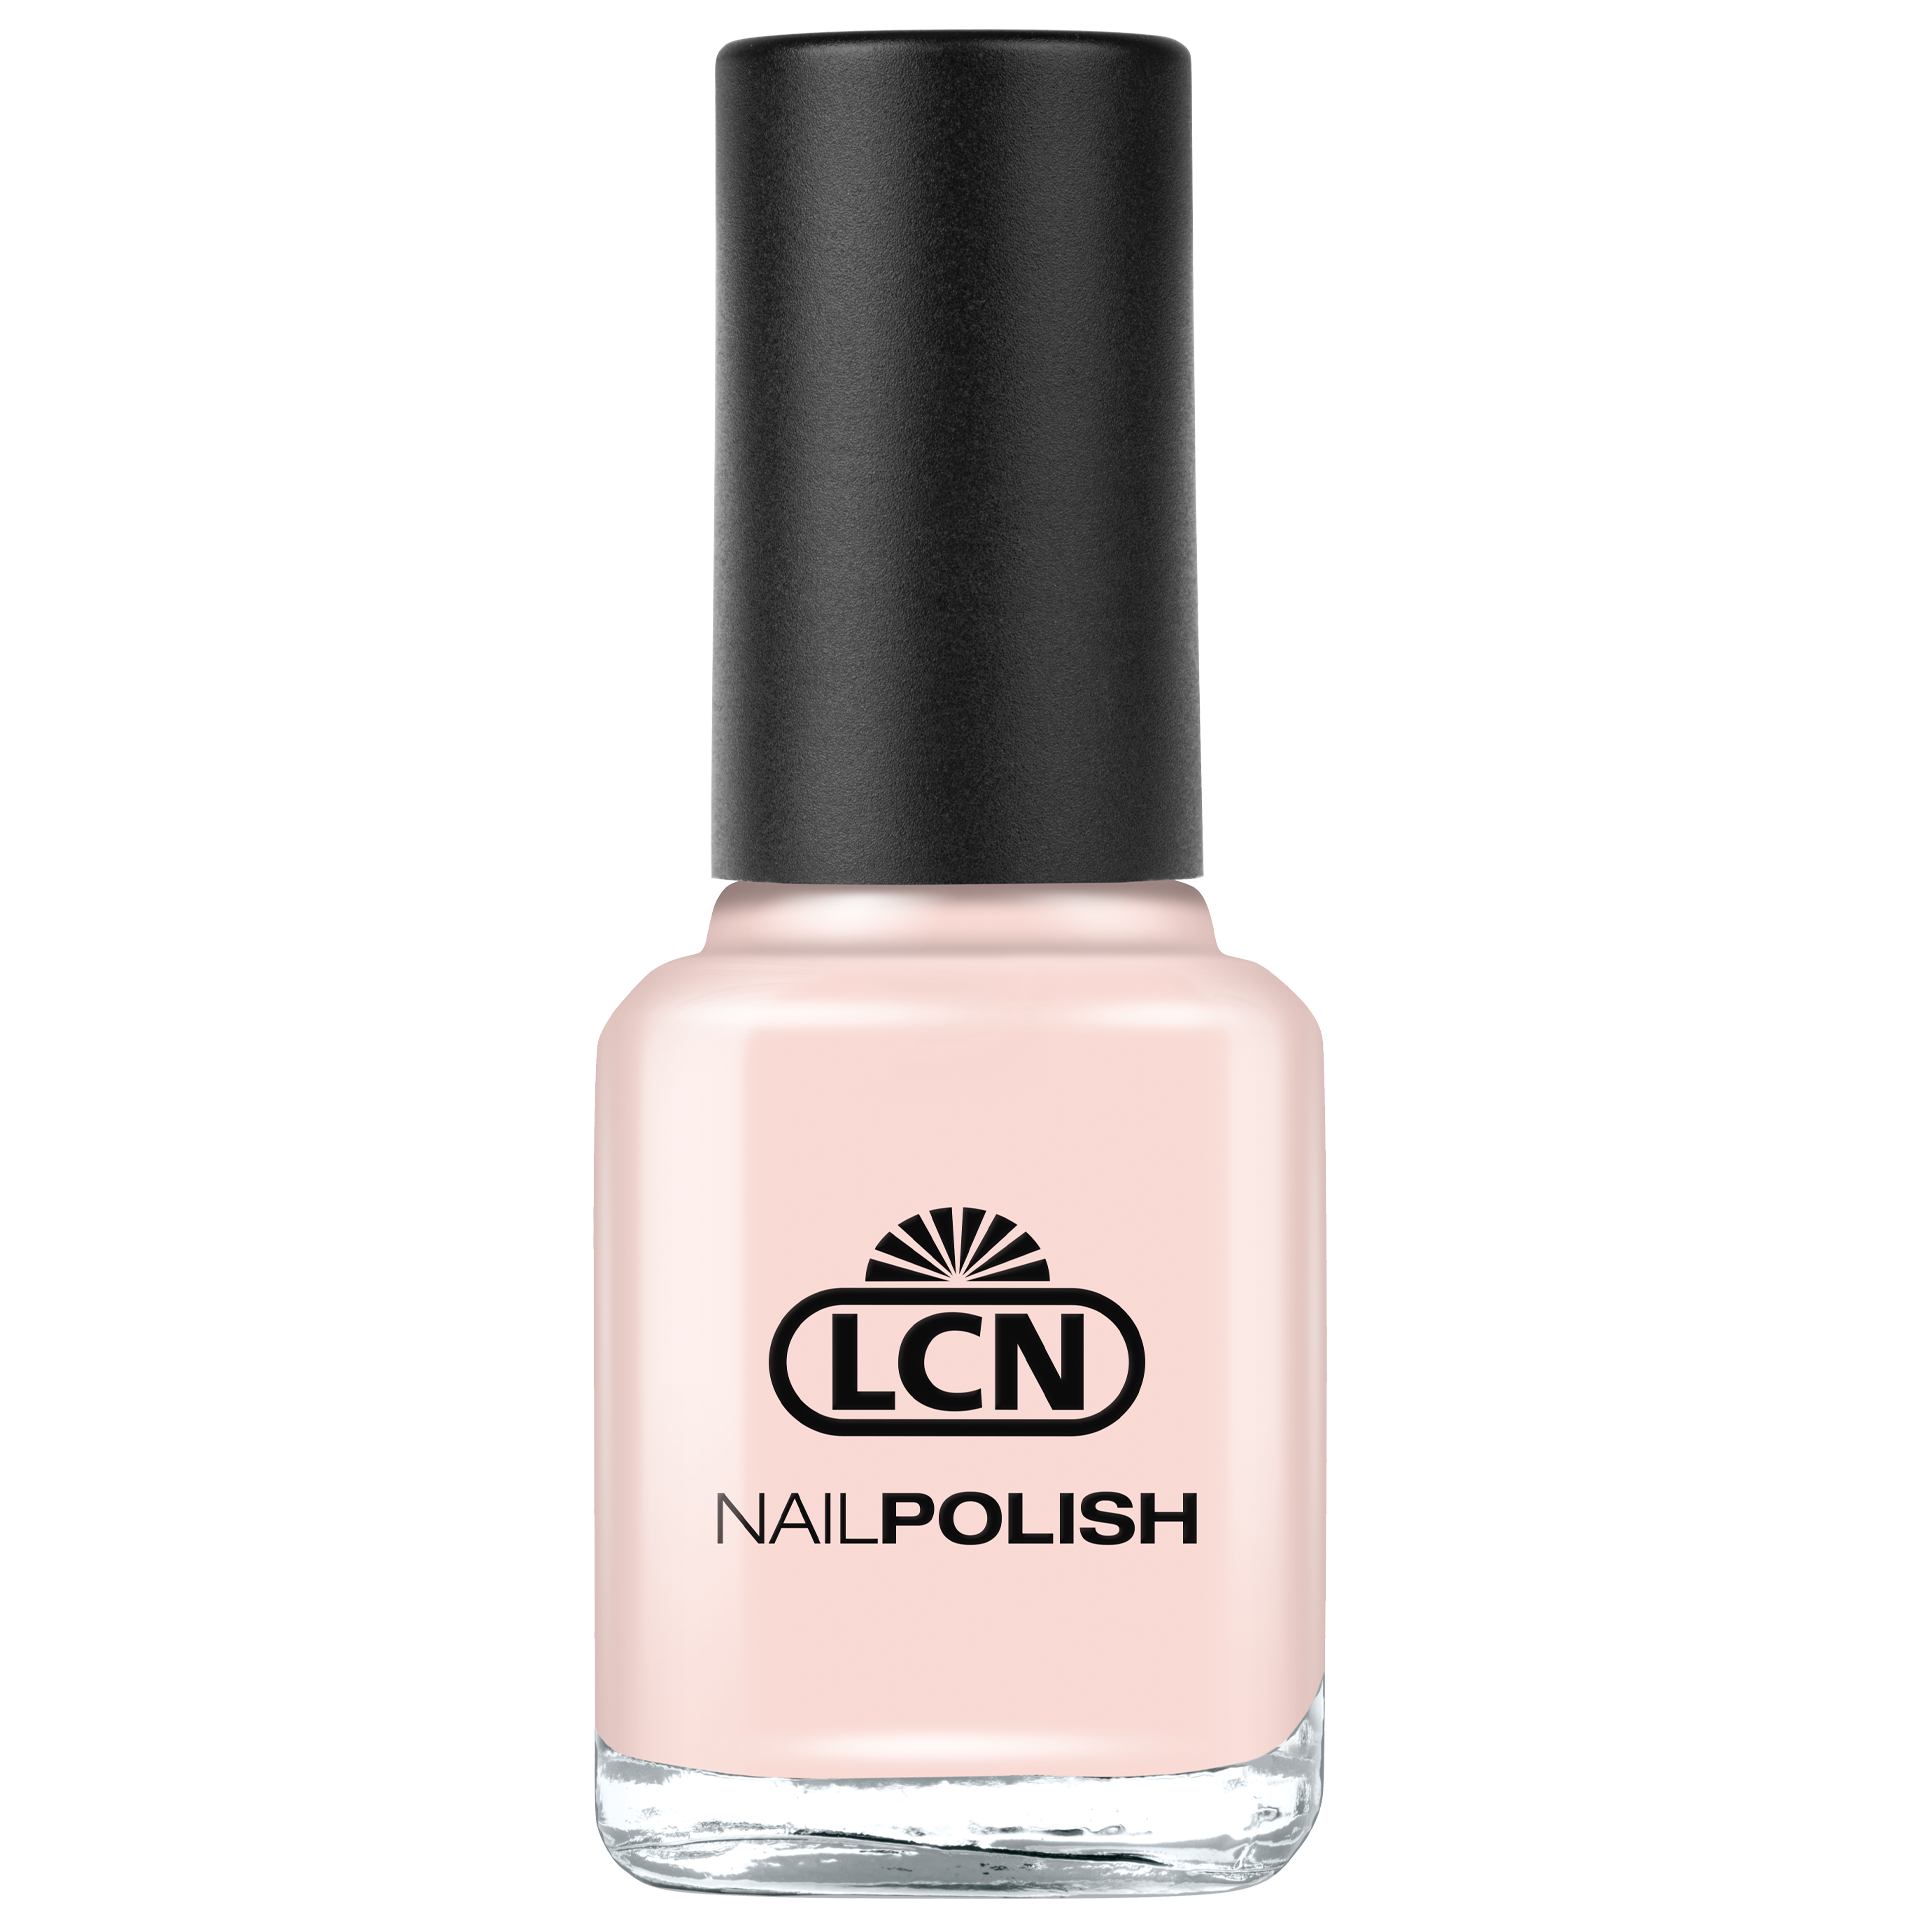 LCN Nail Polish 8ml, (610M) here for the cake